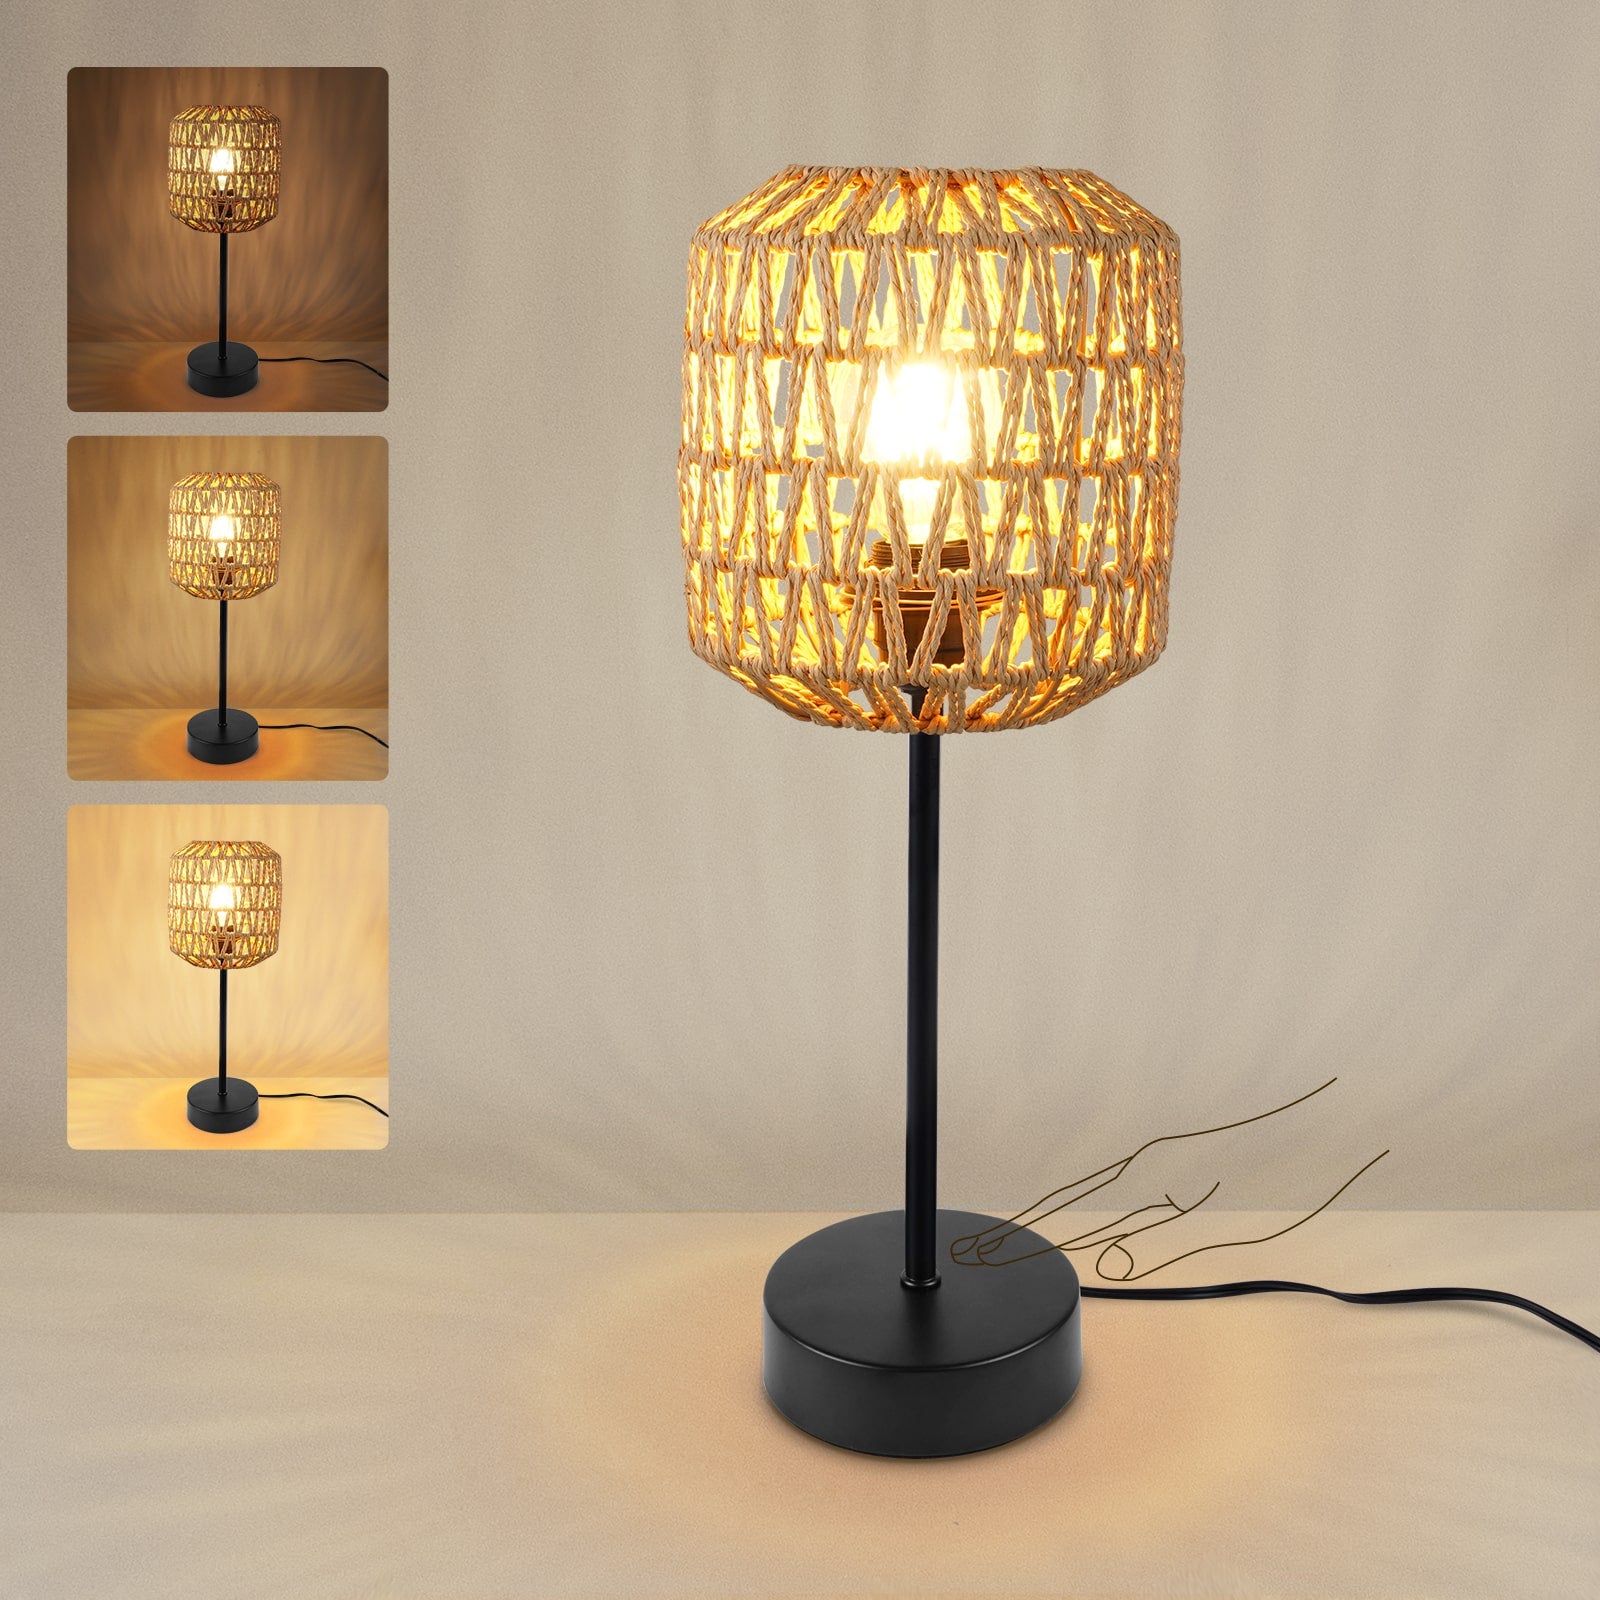 N02 Rustic Rattan Table Lamp with Handmade Woven Shade for Living Room